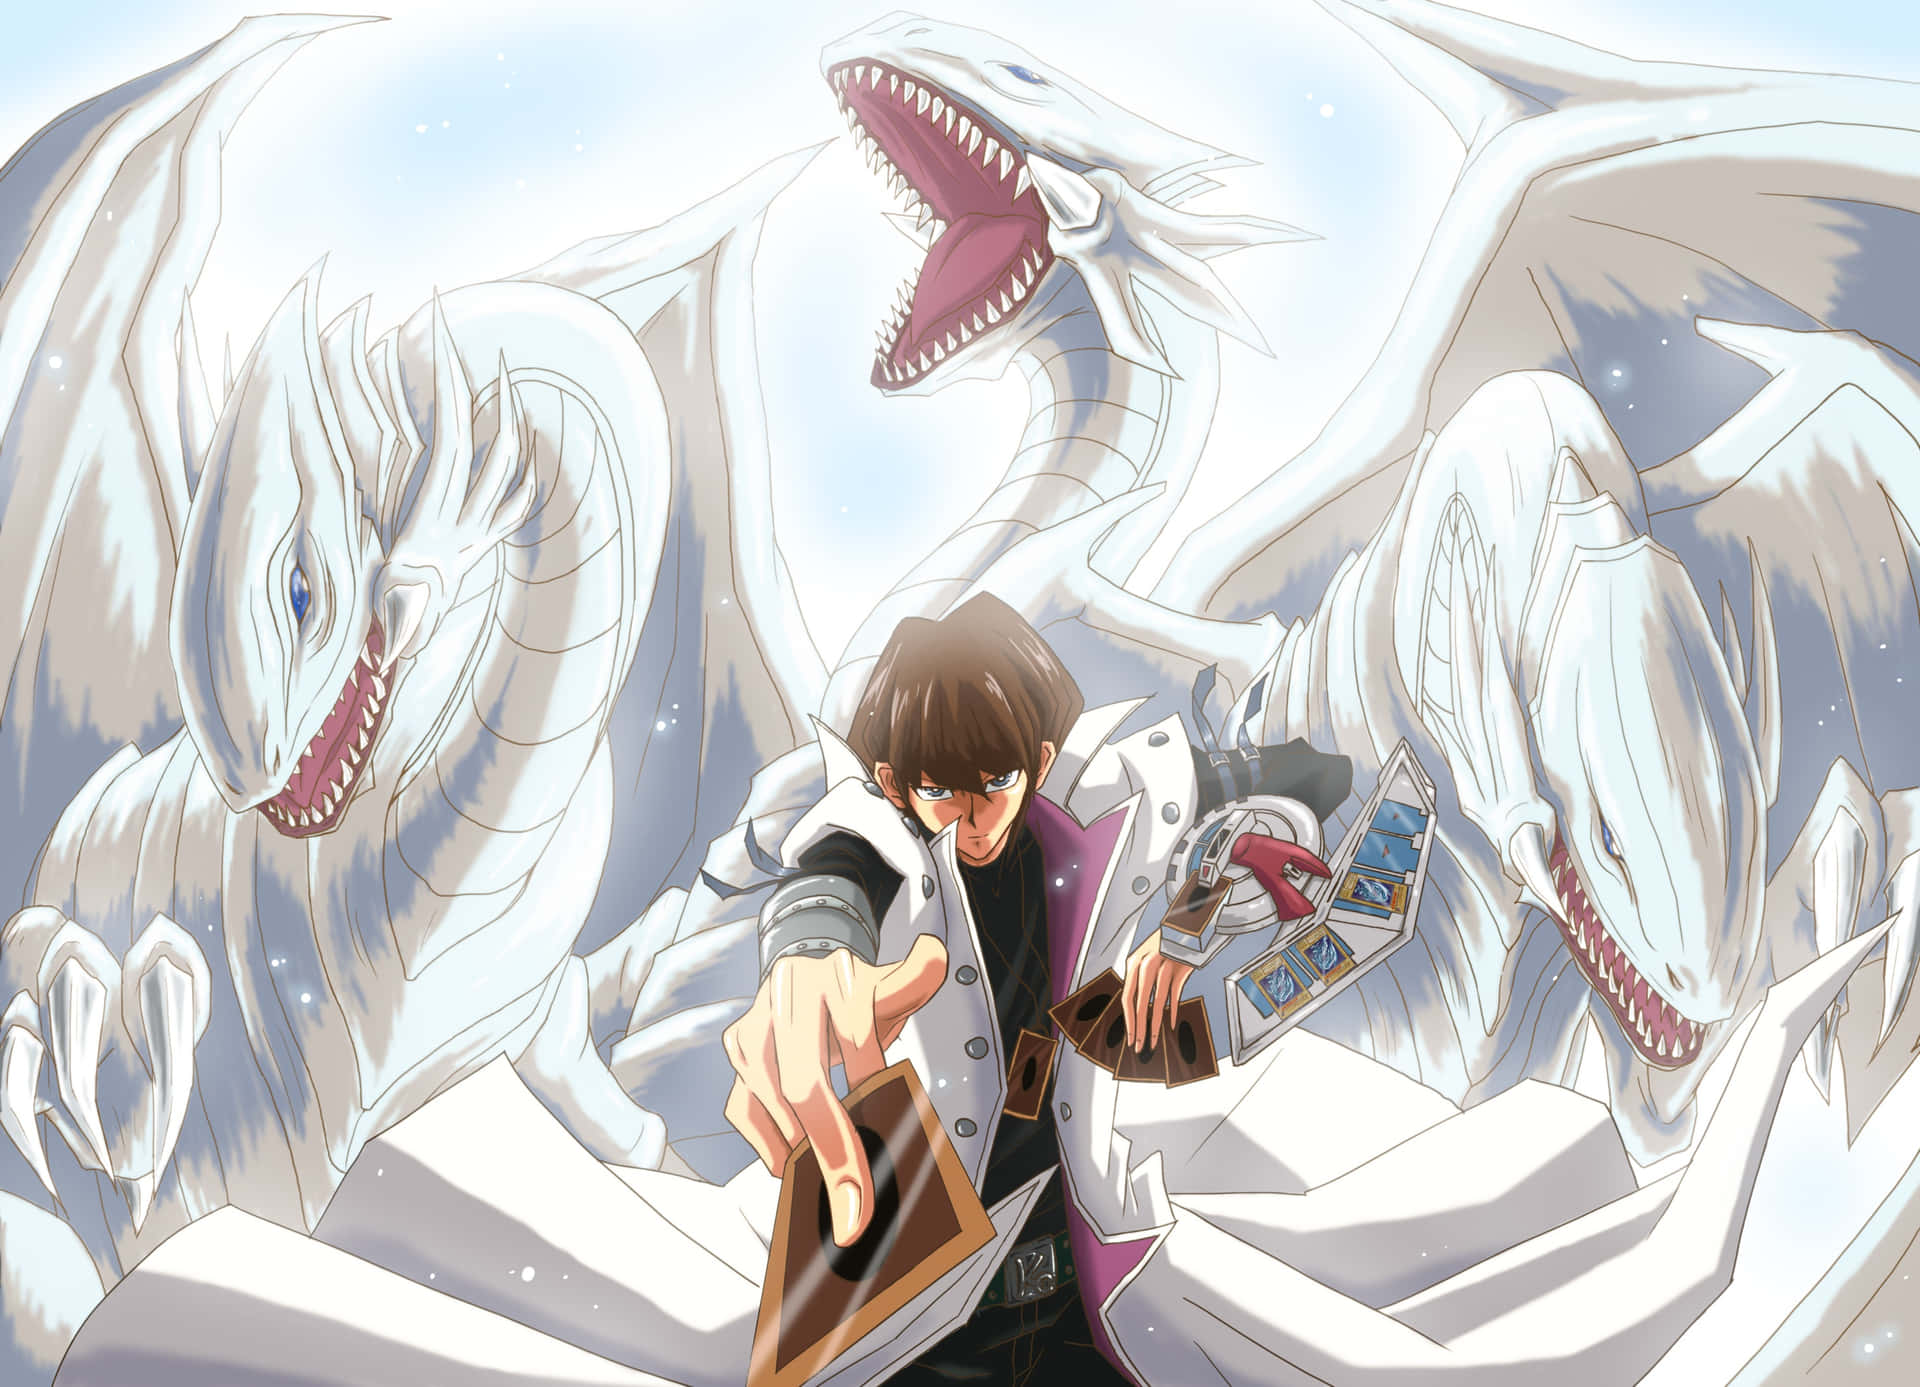 Seto Kaiba confidently standing against an epic dueling arena backdrop Wallpaper